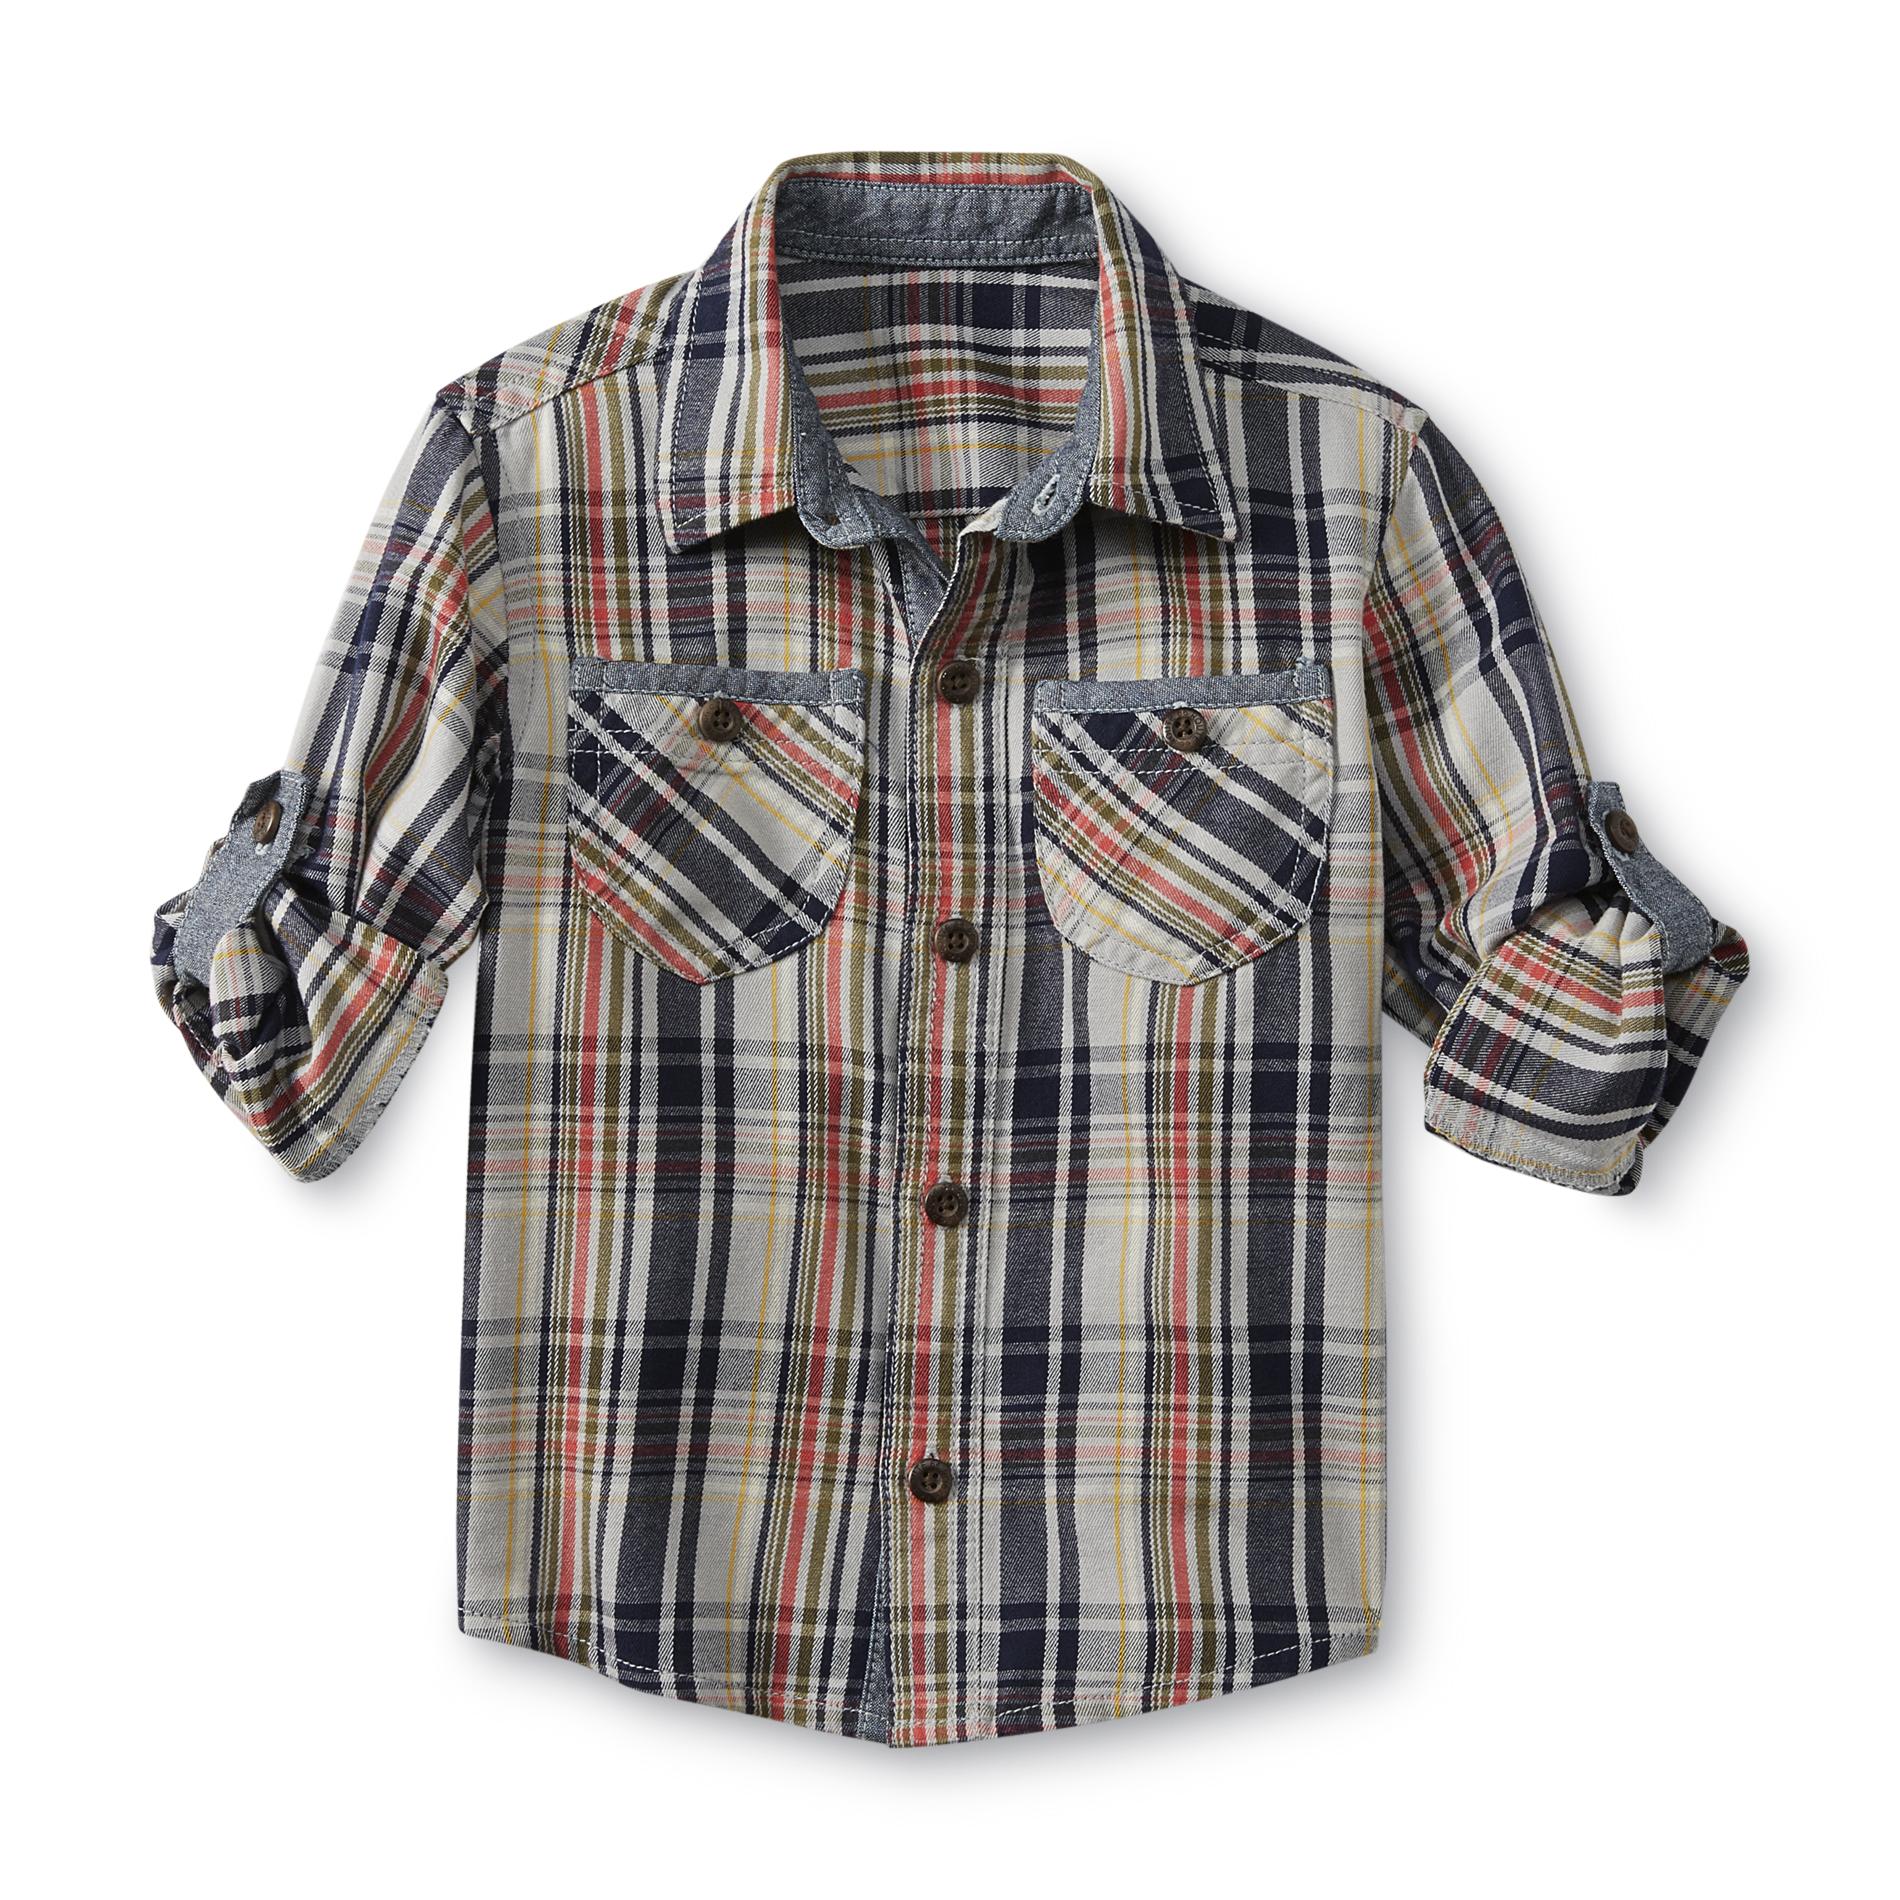 Route 66 Toddler Boy's Casual Shirt - Plaid